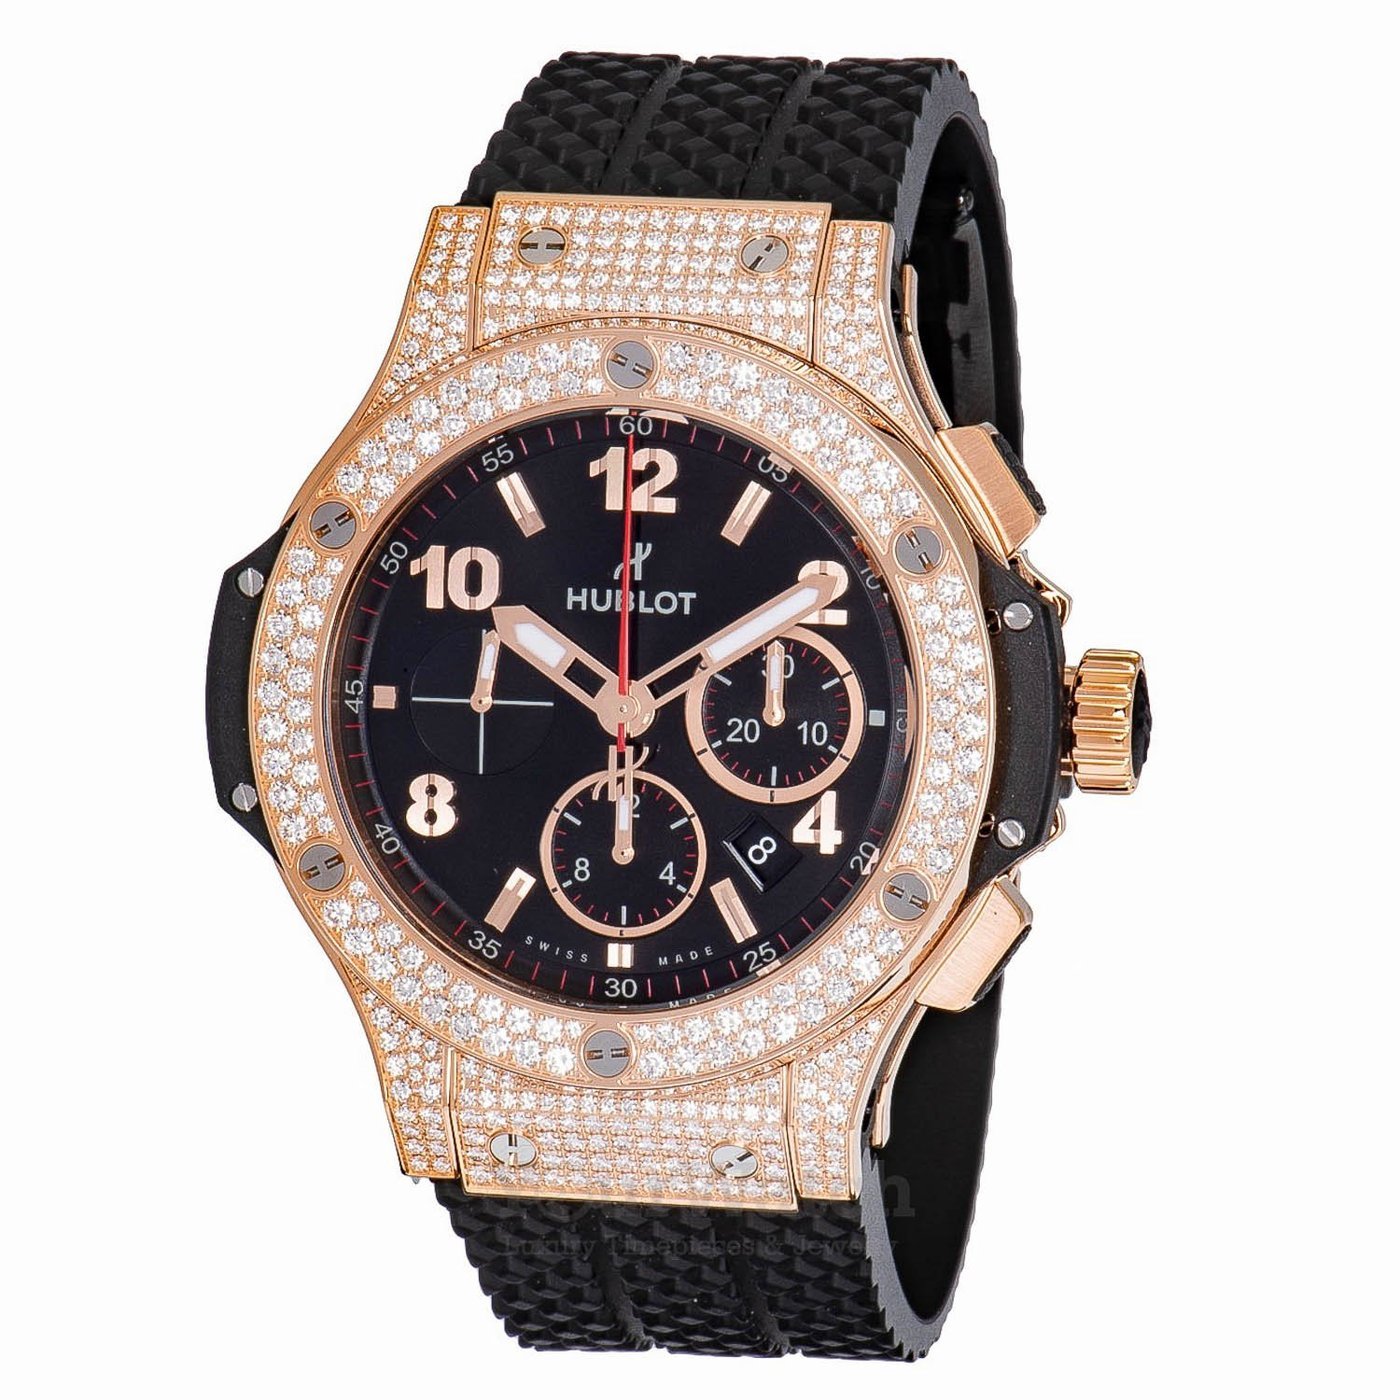 Hublot-Big-Bang-Rose-Gold-With-Diamonds-44mm-Mens-Watch-301PX130RX174-Yourwatch